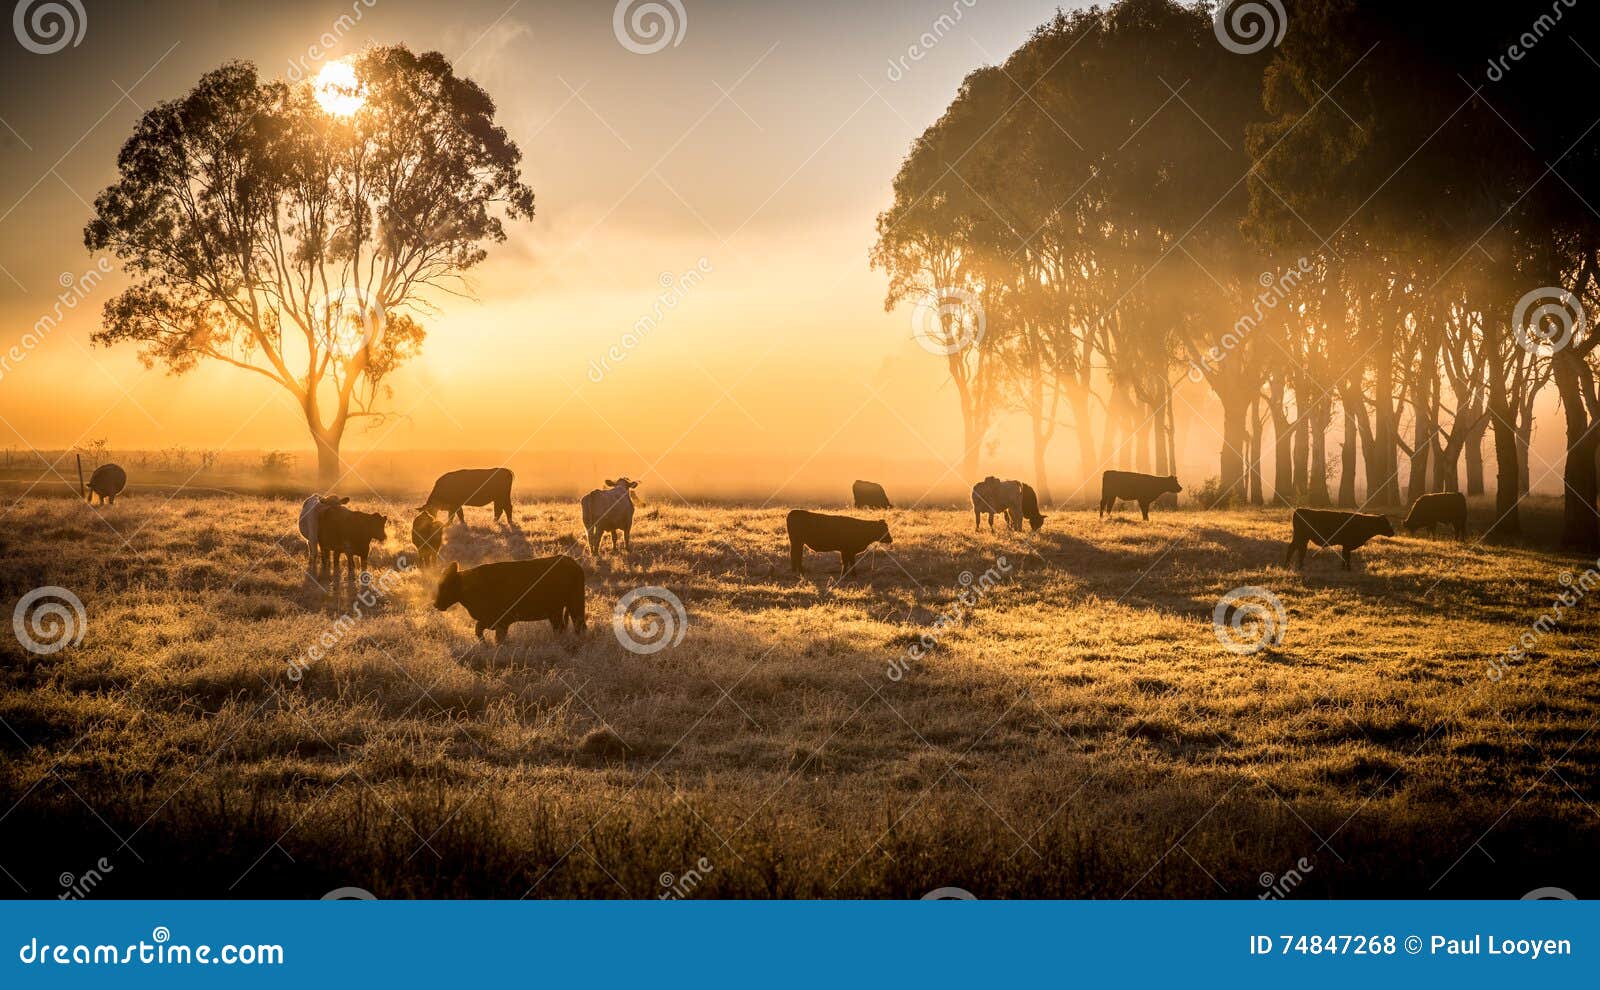 cattle in the morning